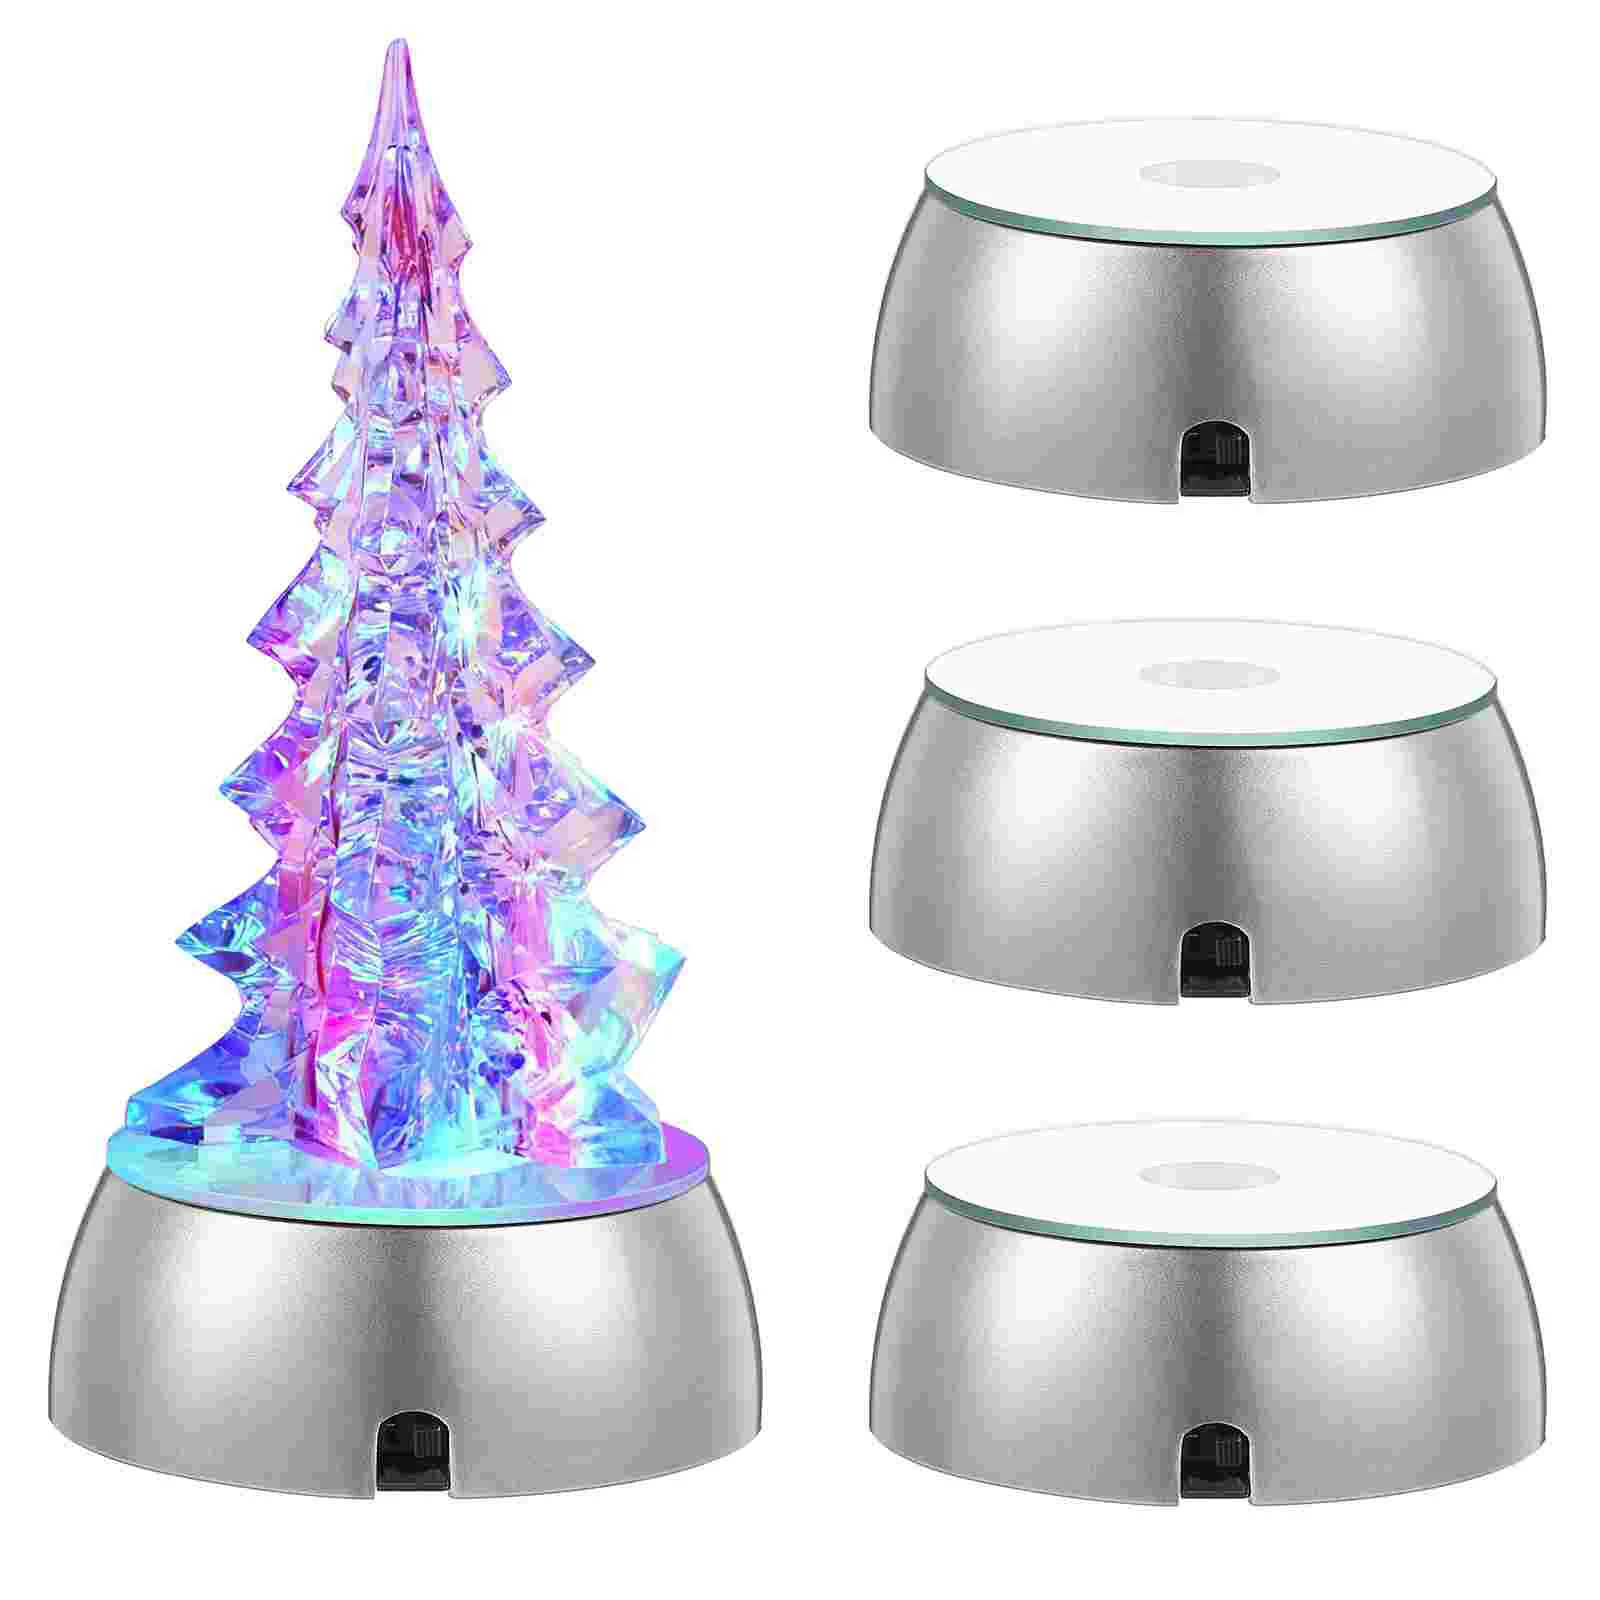 

4 Pcs Crystal Display Shelf Plastic Light Base LED Crystals Bases Show Stands Colorful Ball